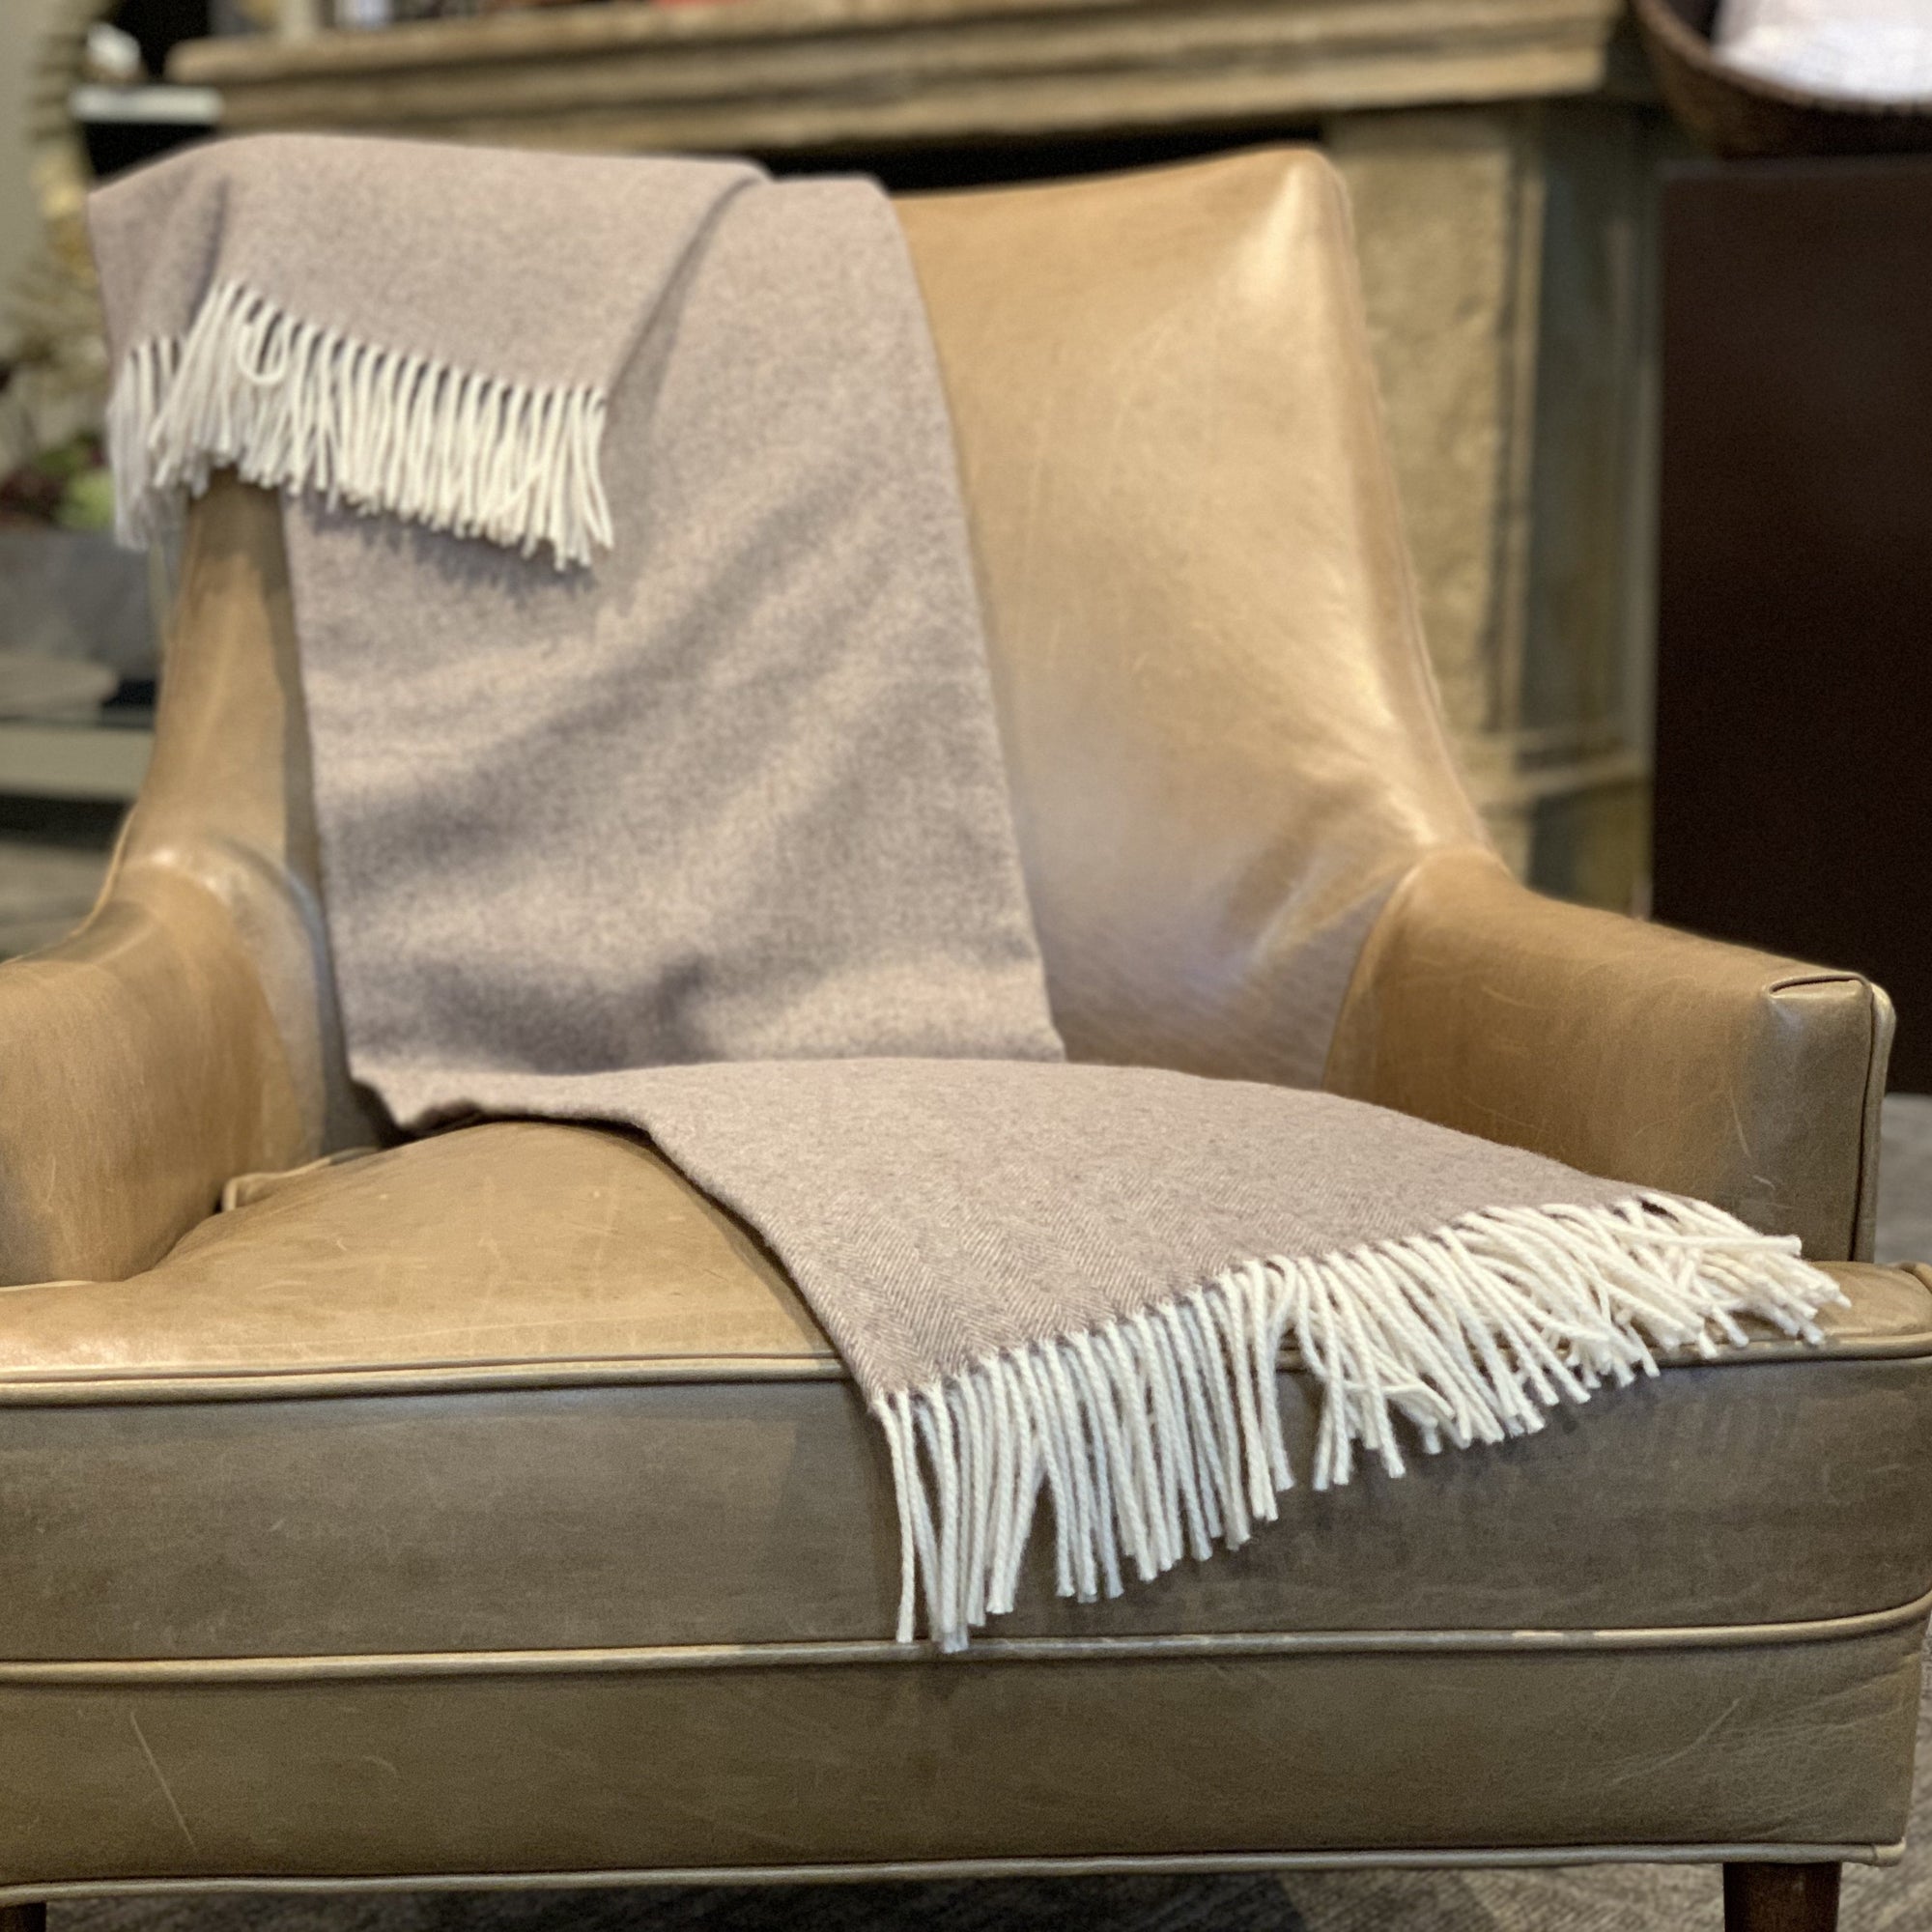 Italian Appenninica Wool Herringbone Fringed Throw Made in Tuscany Italy | Timothy De Clue Collection Seattle 